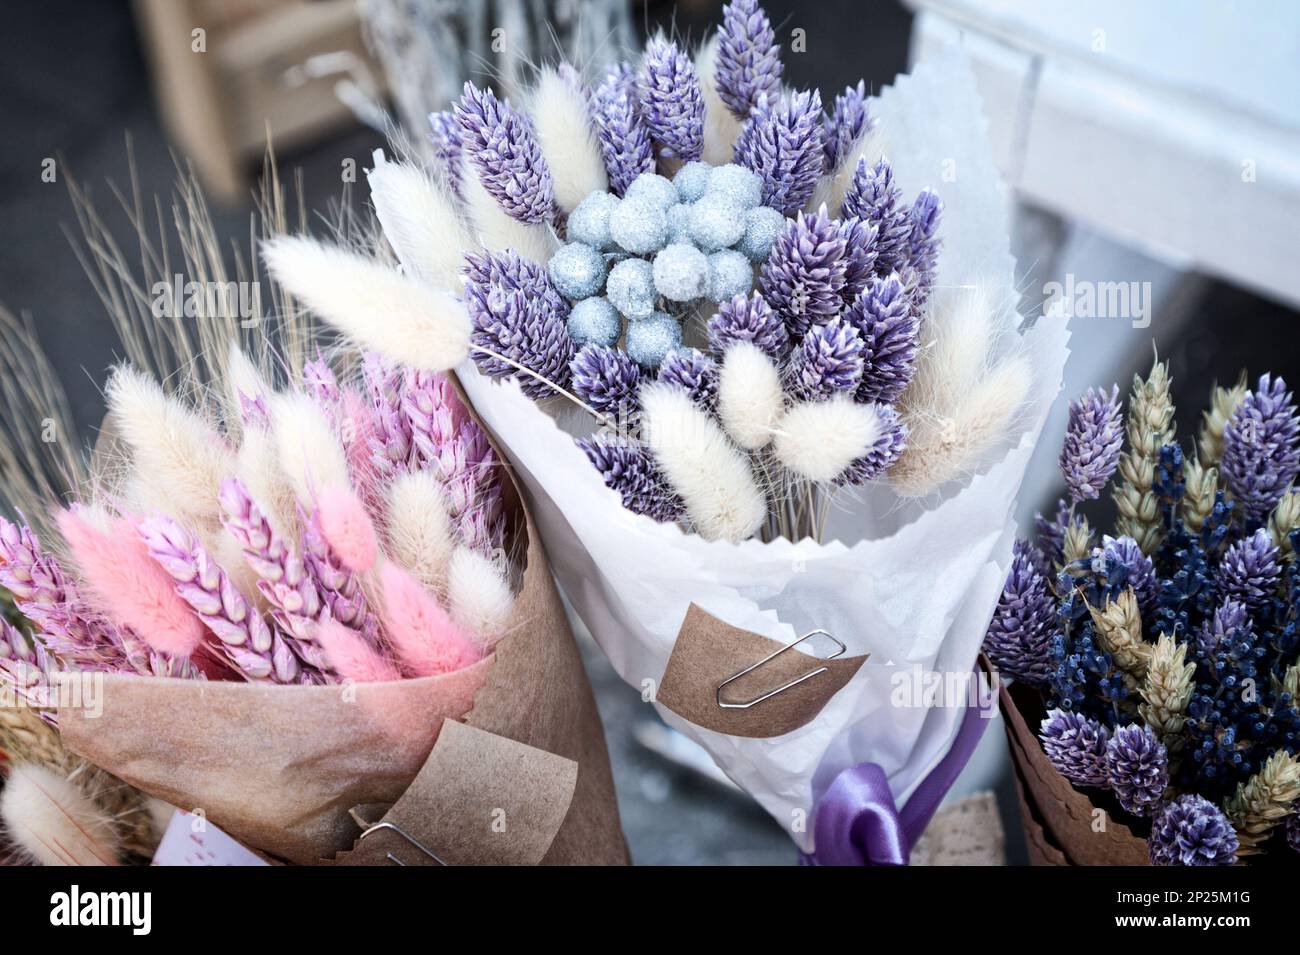 Dry herbs colorful purple and pink bouquets at flower shop. Beautiful bundles of pink and blue dried spikelets at a market - tinted lavender, canary g Stock Photo